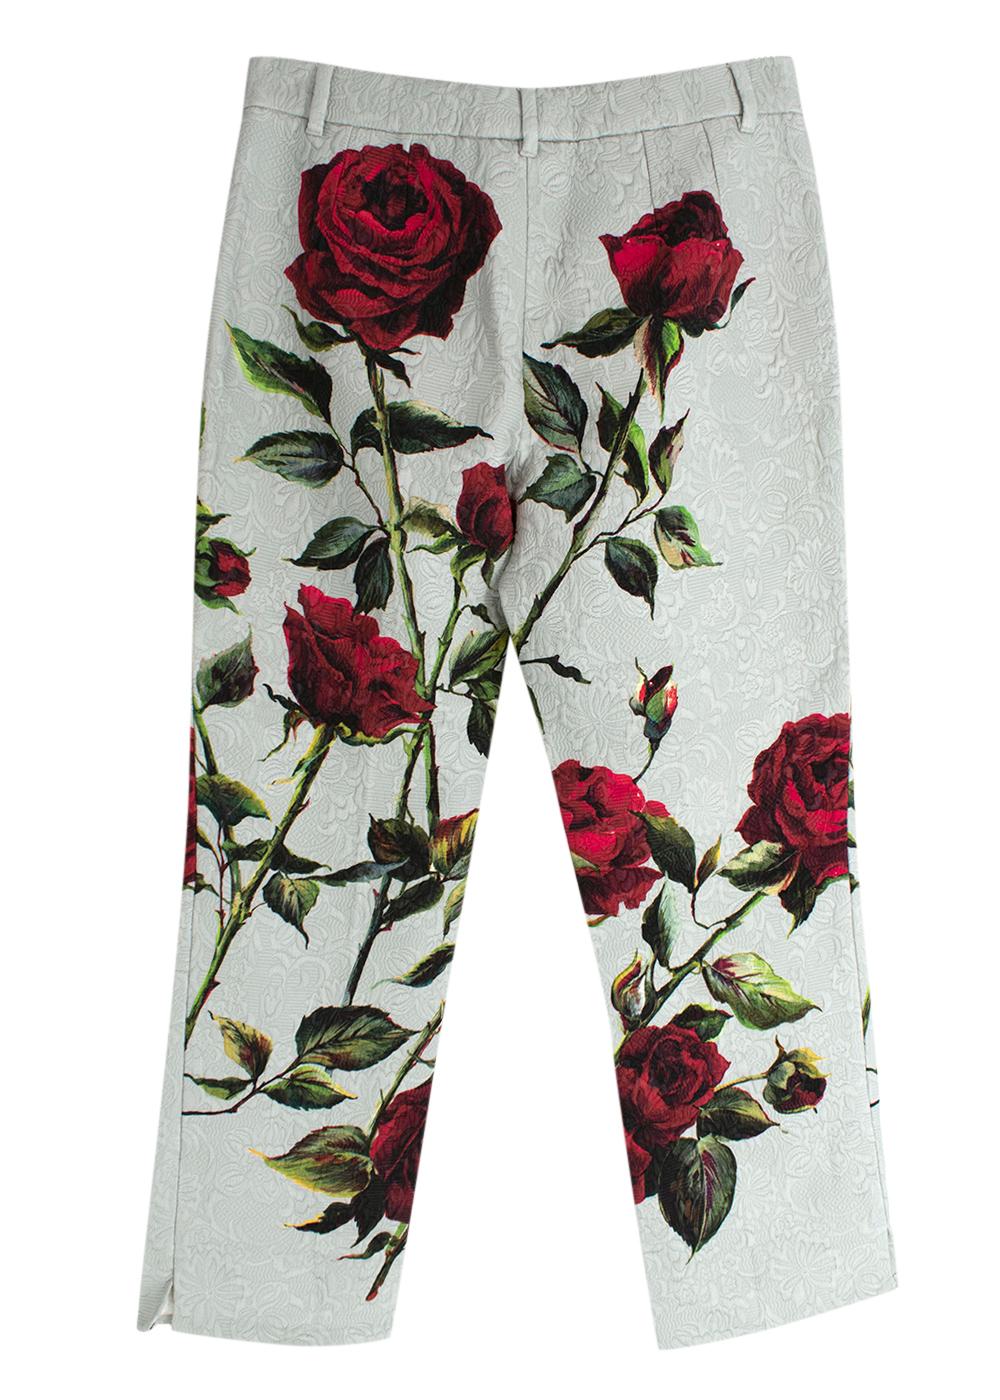 Dolce & Gabbana pale green rose printed brocade trousers

- Pale green floral brocade trousers with a deep red roses print across the front and back
- Slim leg, tailored shape 
- Flat front, zip fly
- Silk cotton lining 

Materials 
54% Cotton 
34%